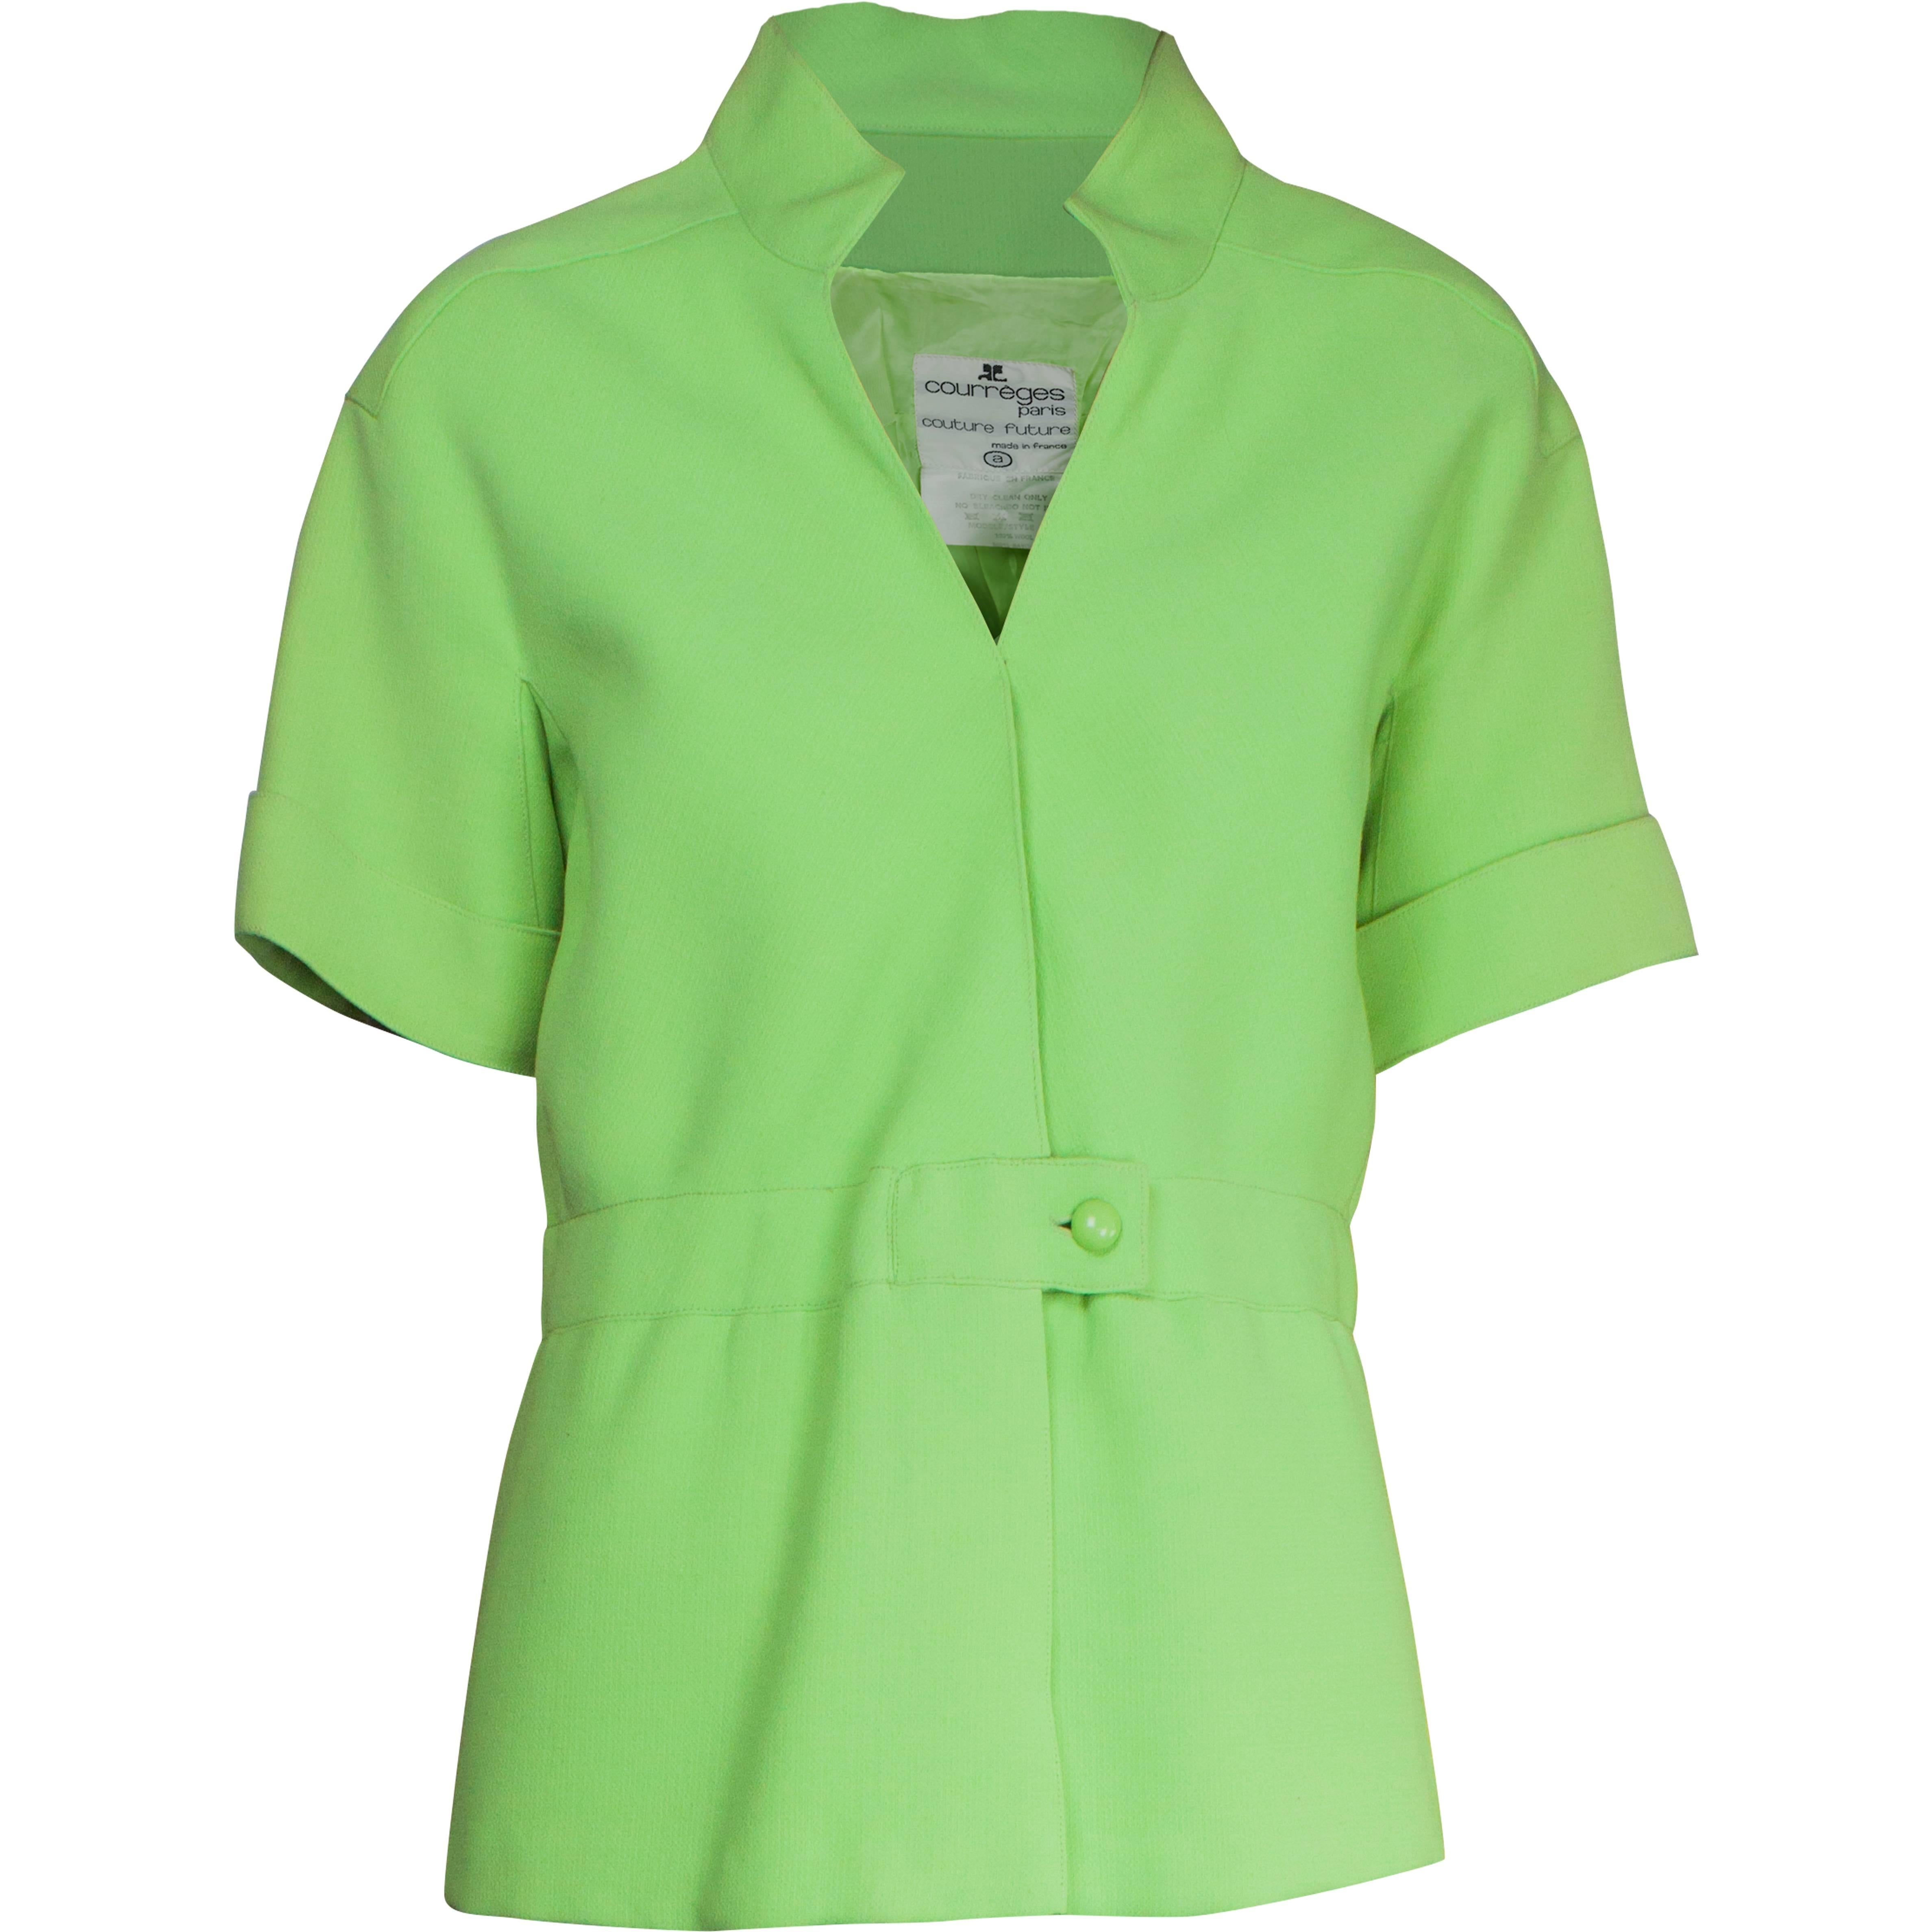 Andrè Courreges Early lime green tunic, circa 1967 For Sale